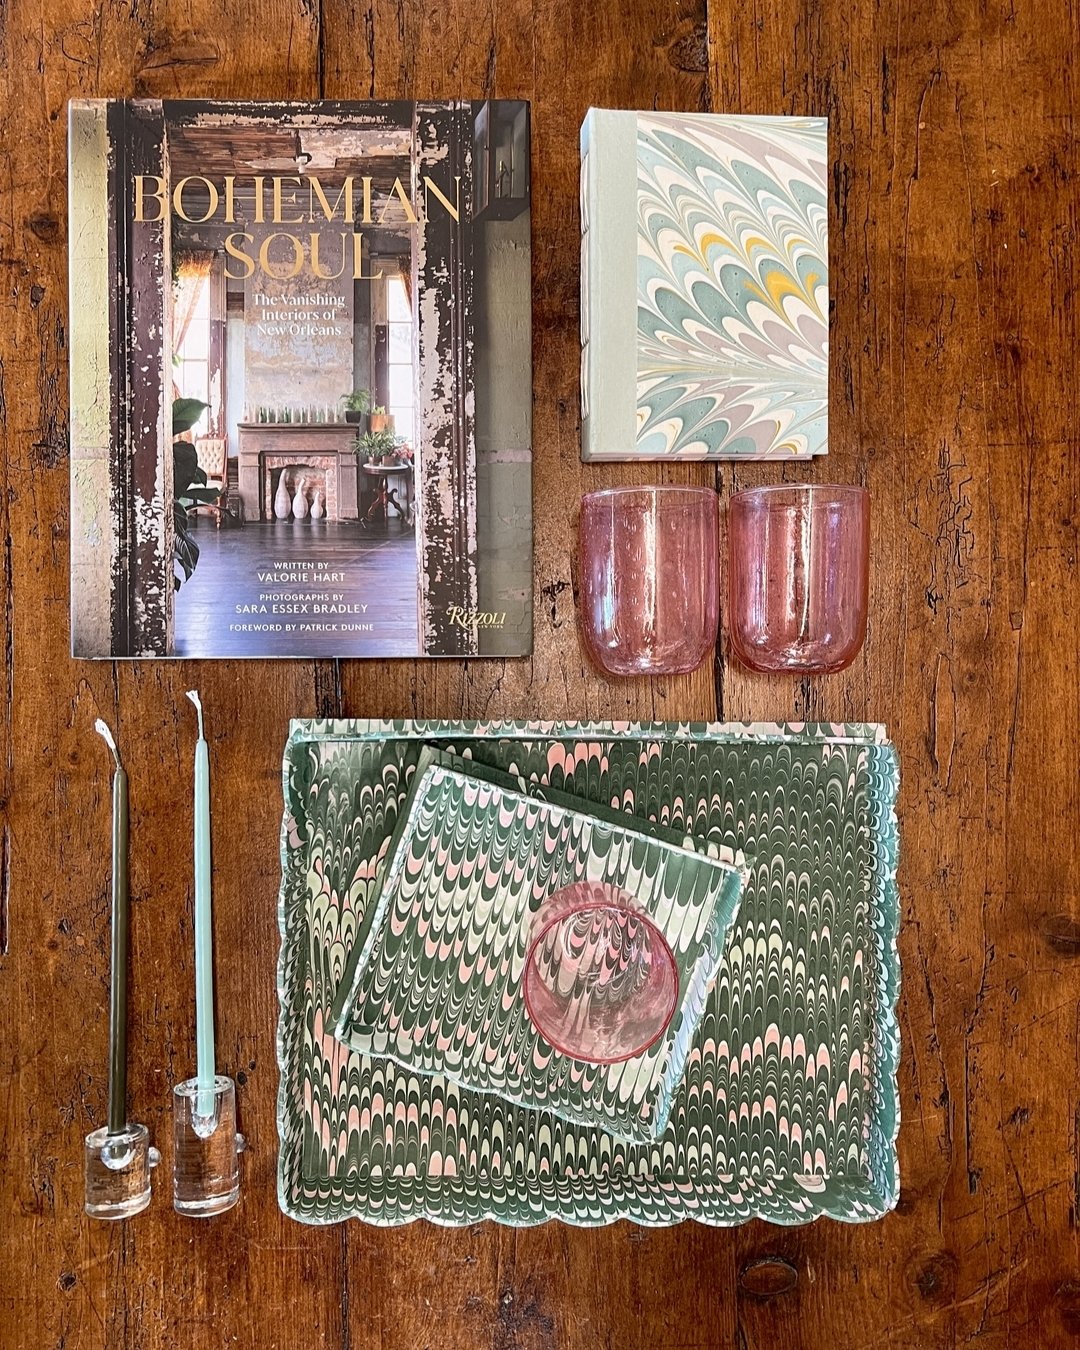 Spoil your bohemian friend with gifts as colorful as her personality! We love these whimsical scalloped edge trays and  pink drinking glasses. The &quot;Bohemian Soul&quot; Coffee Table Book inspires wanderlust, and vintage glass candlestick holders 